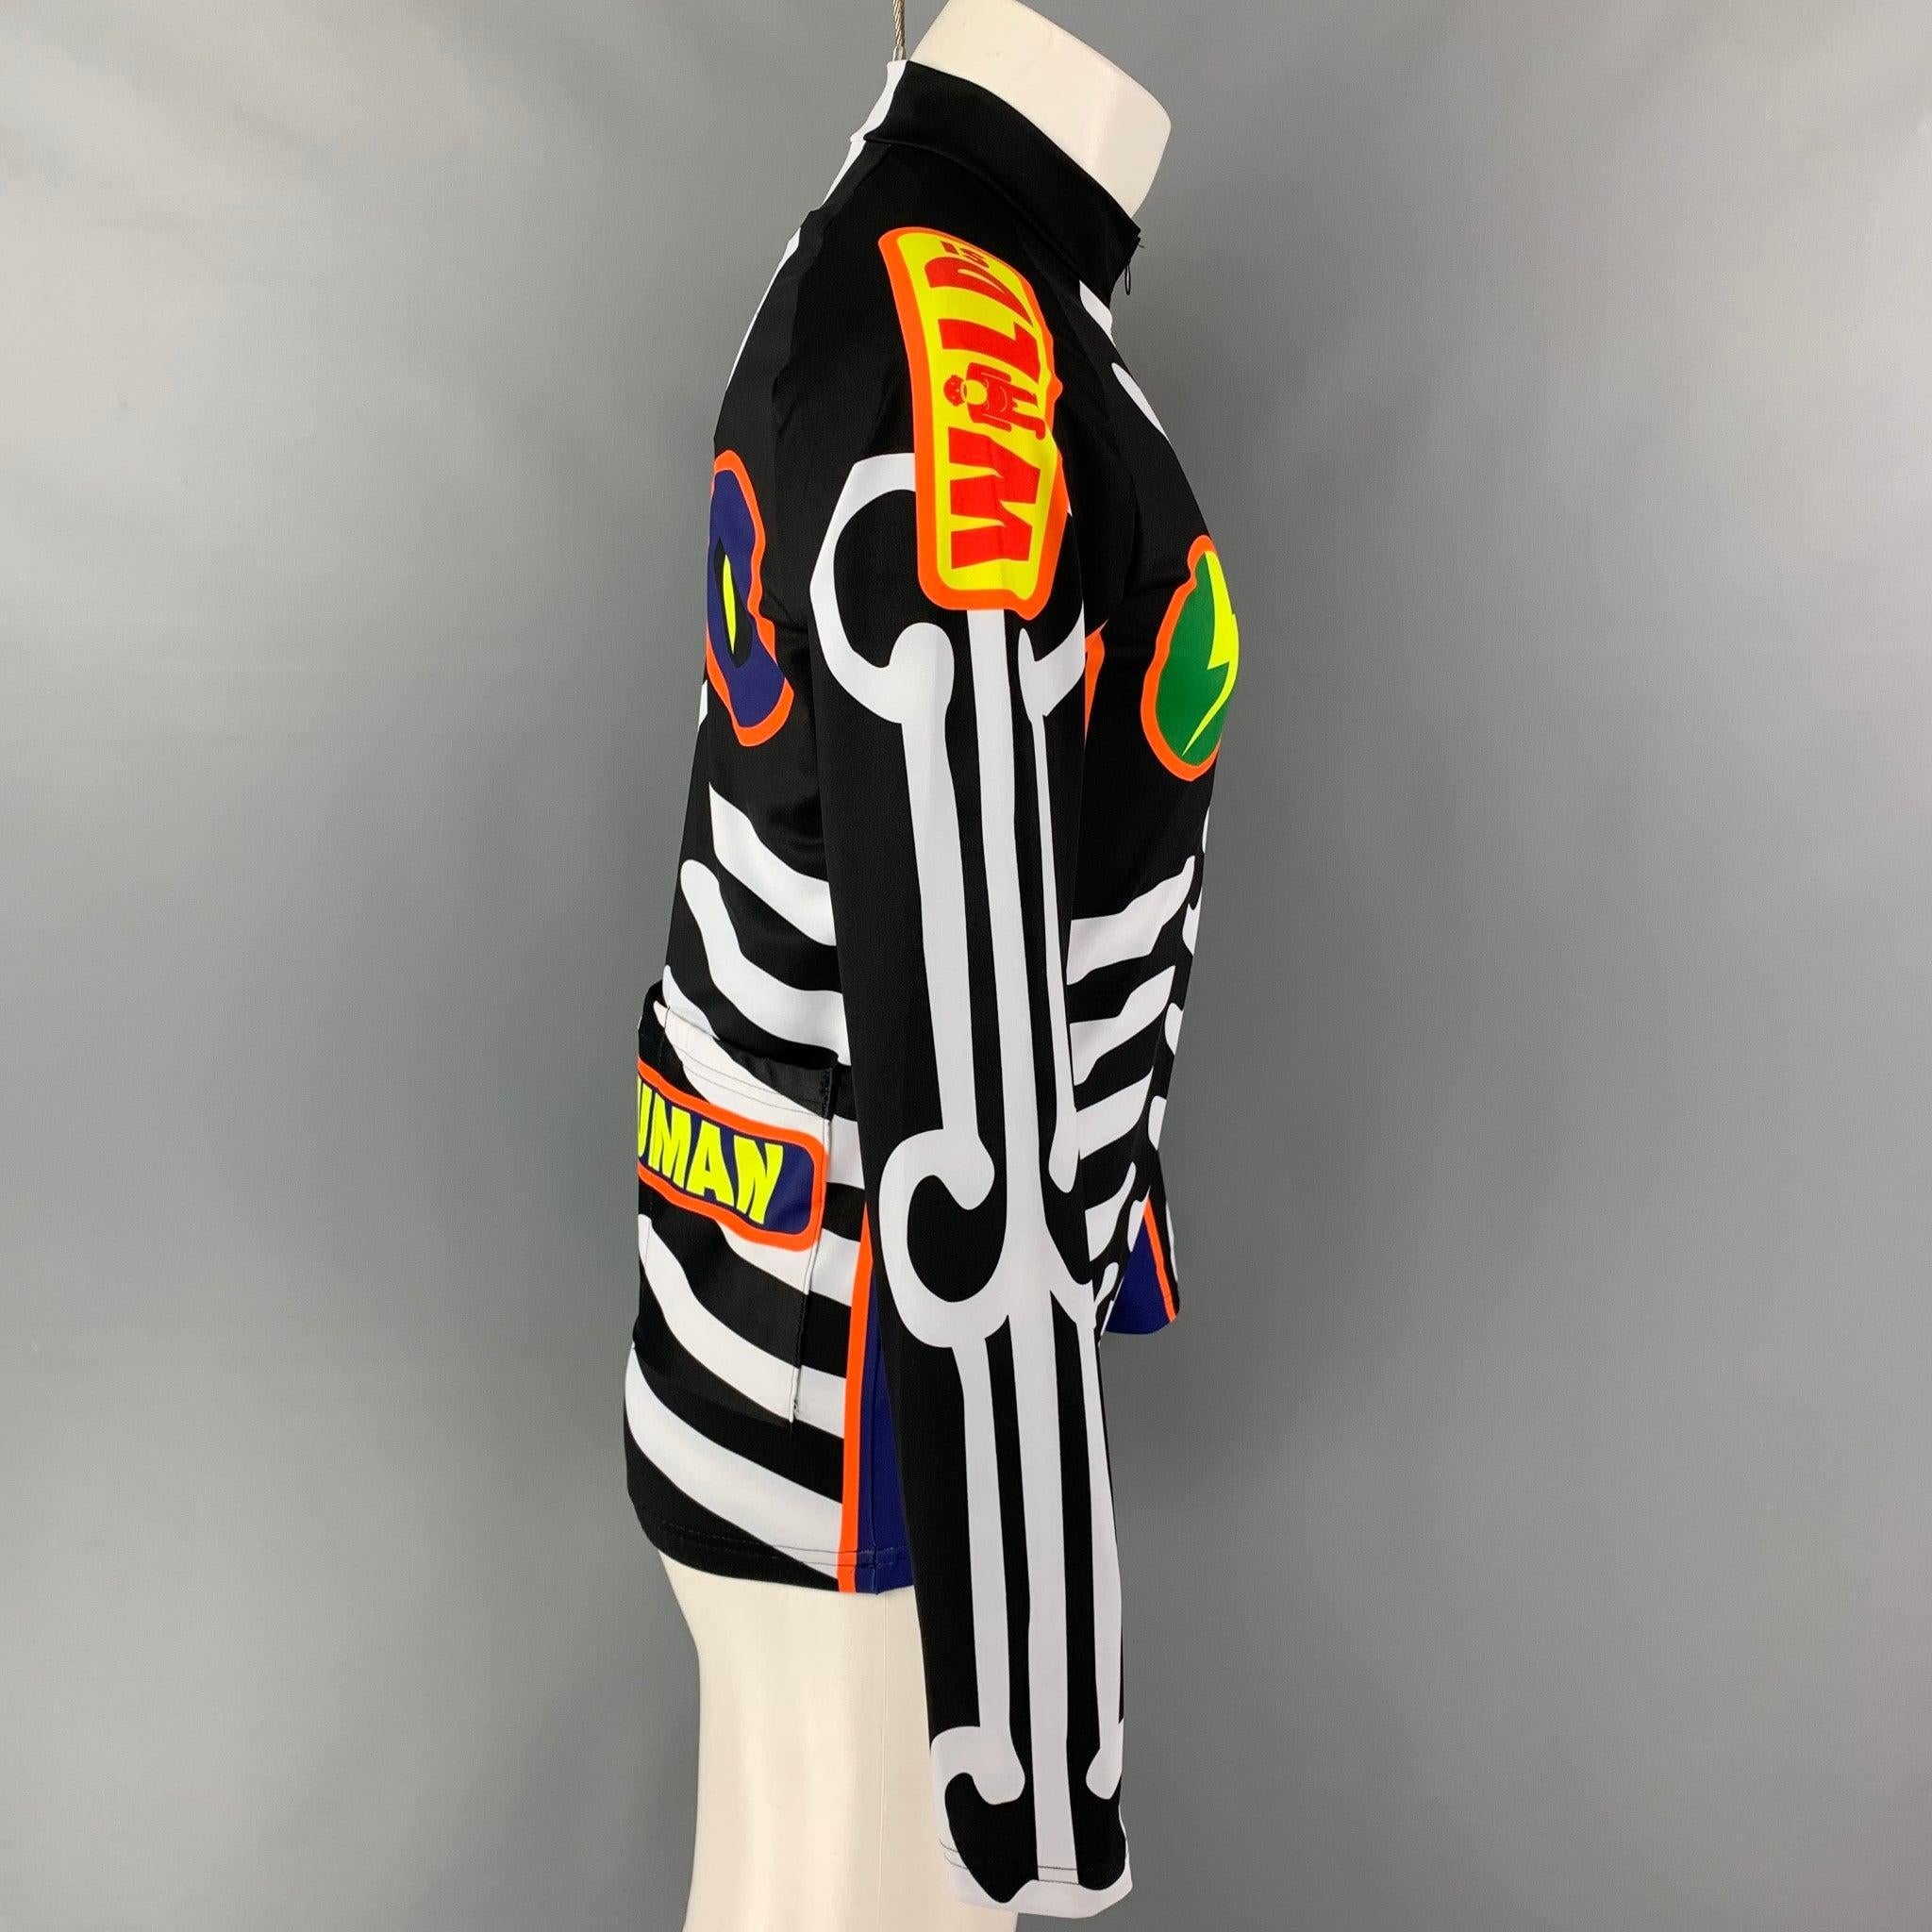 Walter Van Beirendonck Cycle Biker Jersey Pullover Top from Spring Summer 2019 WILD collection. Features a stretch material quarter zip graphic print design, collar and back pockets.Introduced as part of Walter Van Beirendonck’s W< collections